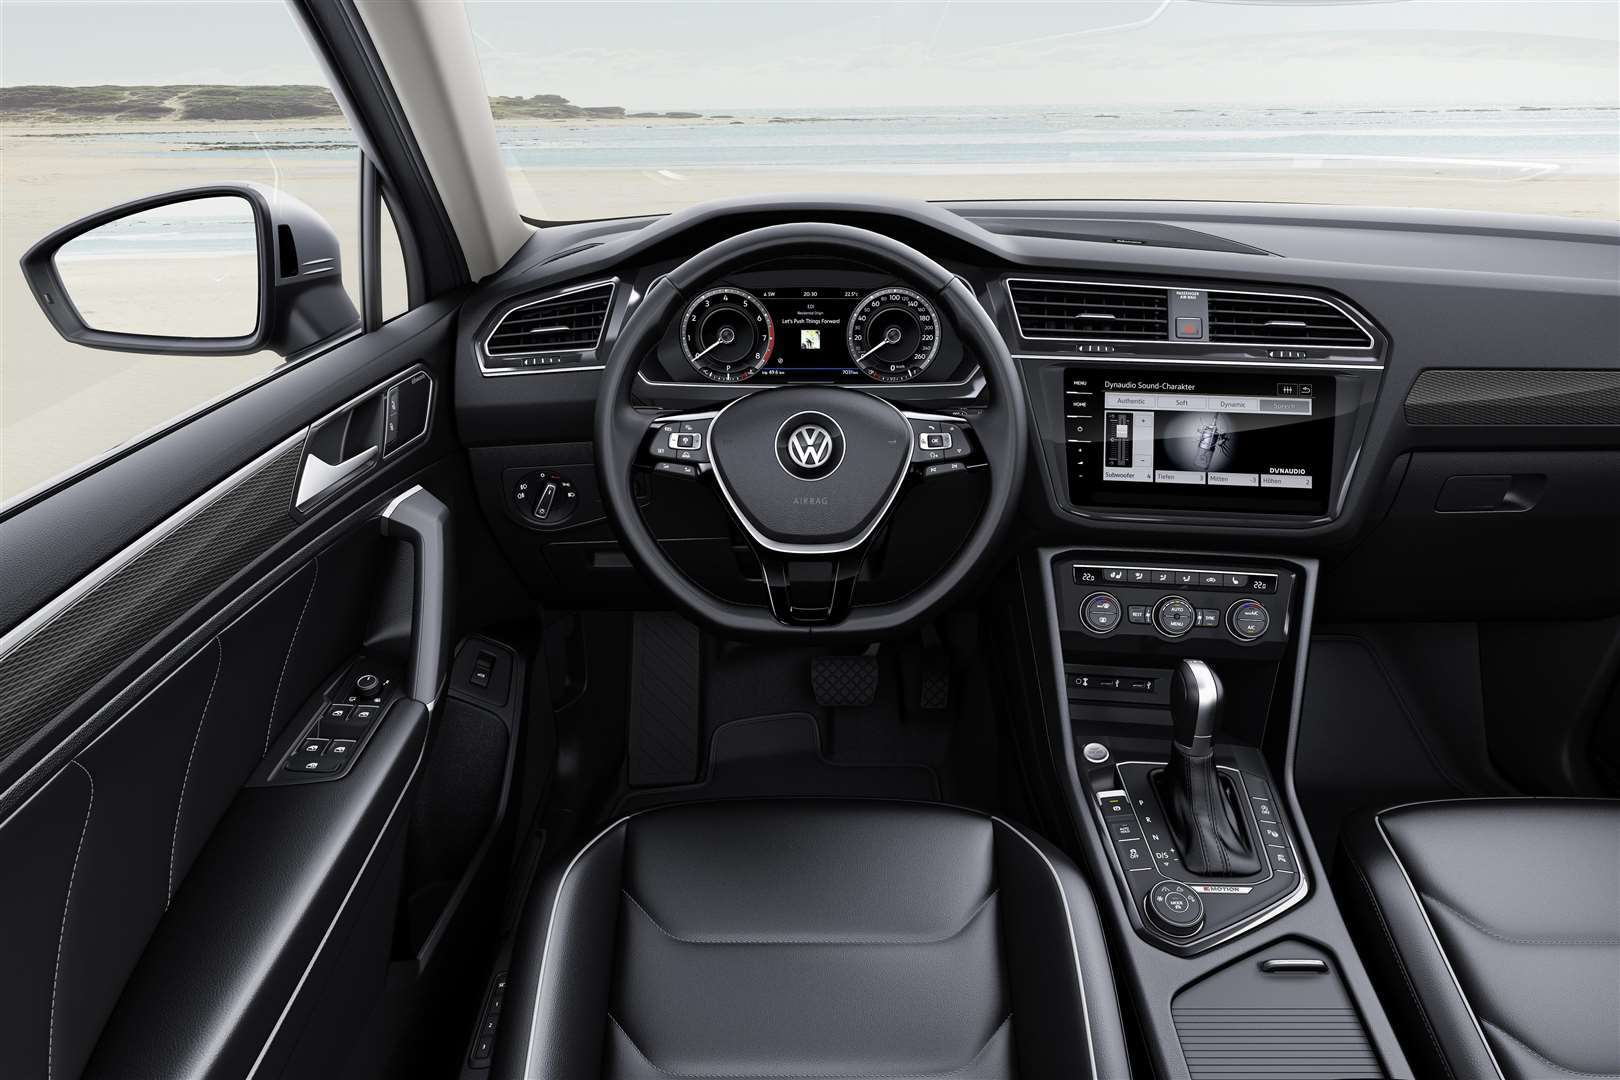 The dashboard and controls are identical to those found in the standard Tiguan (5582814)